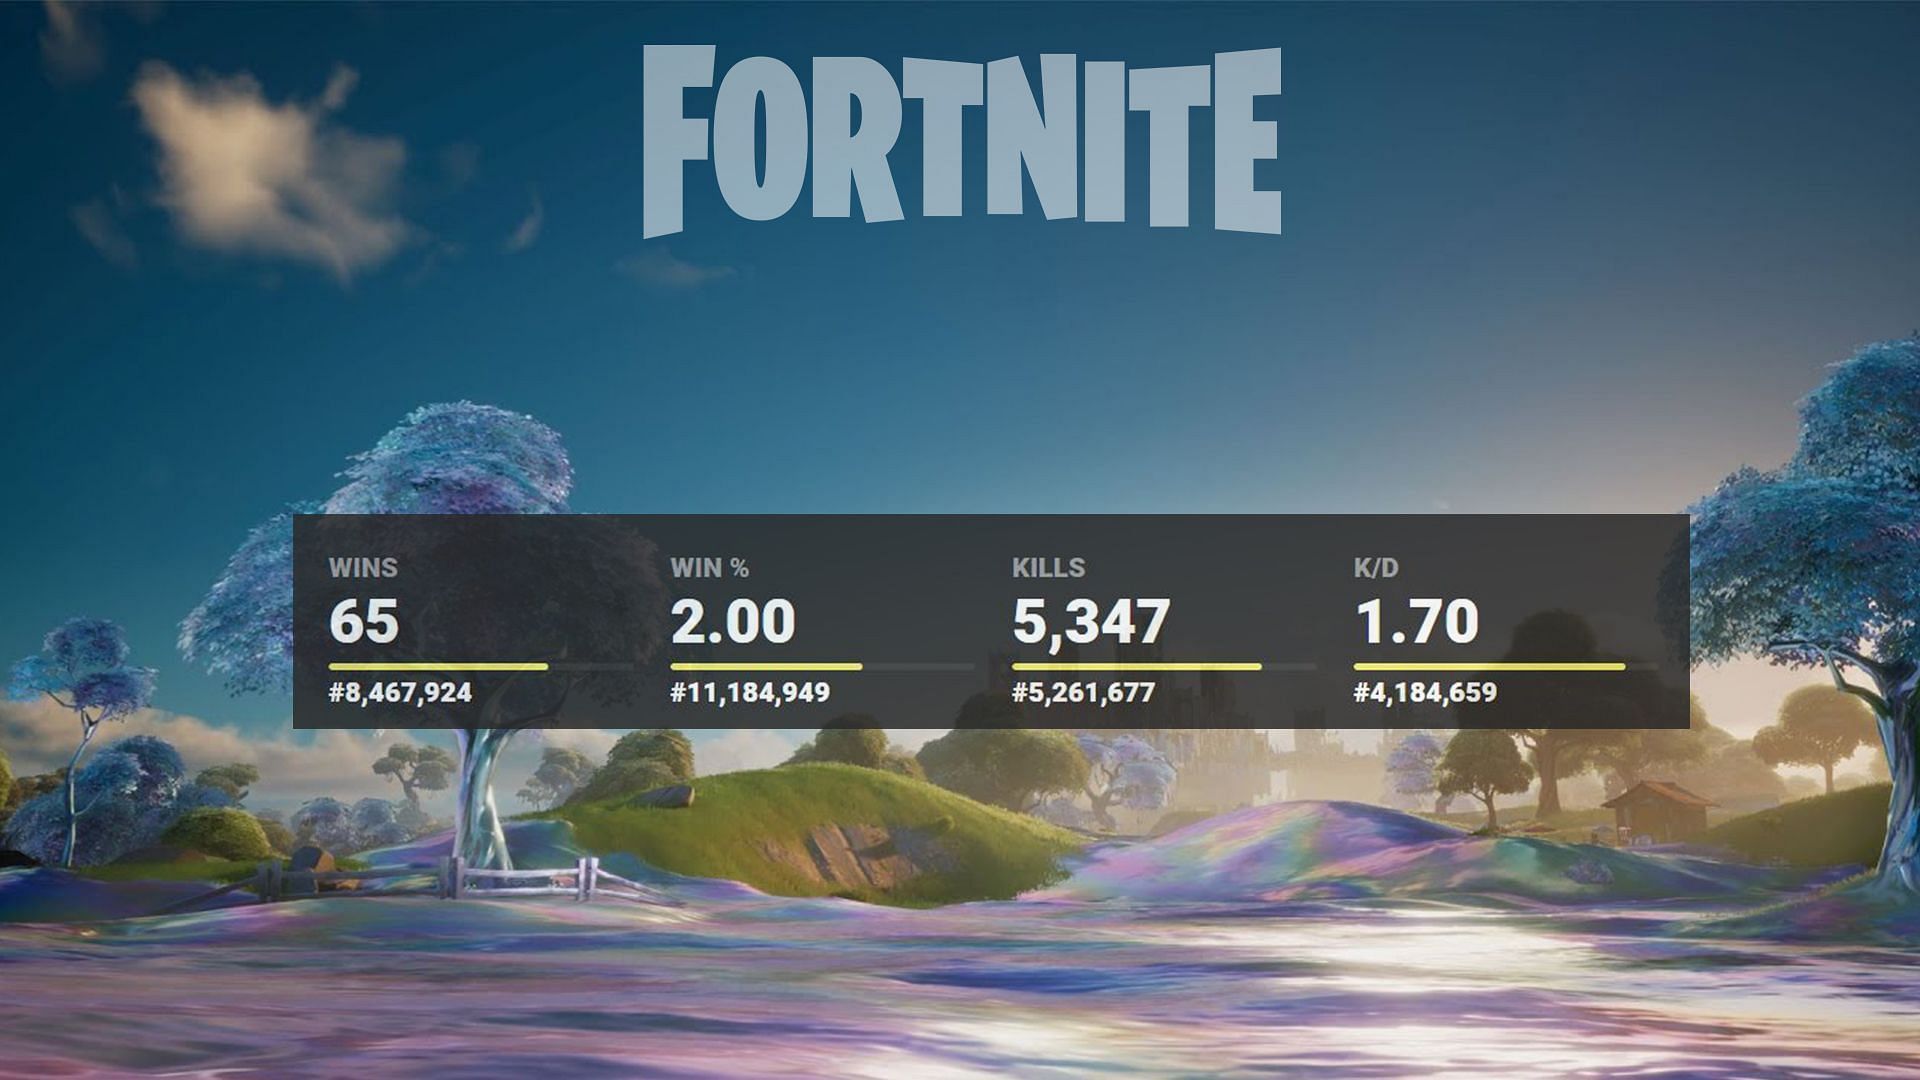 Players can use third-party applications to check their Fortnite stats. (Image via Sportskeeda)